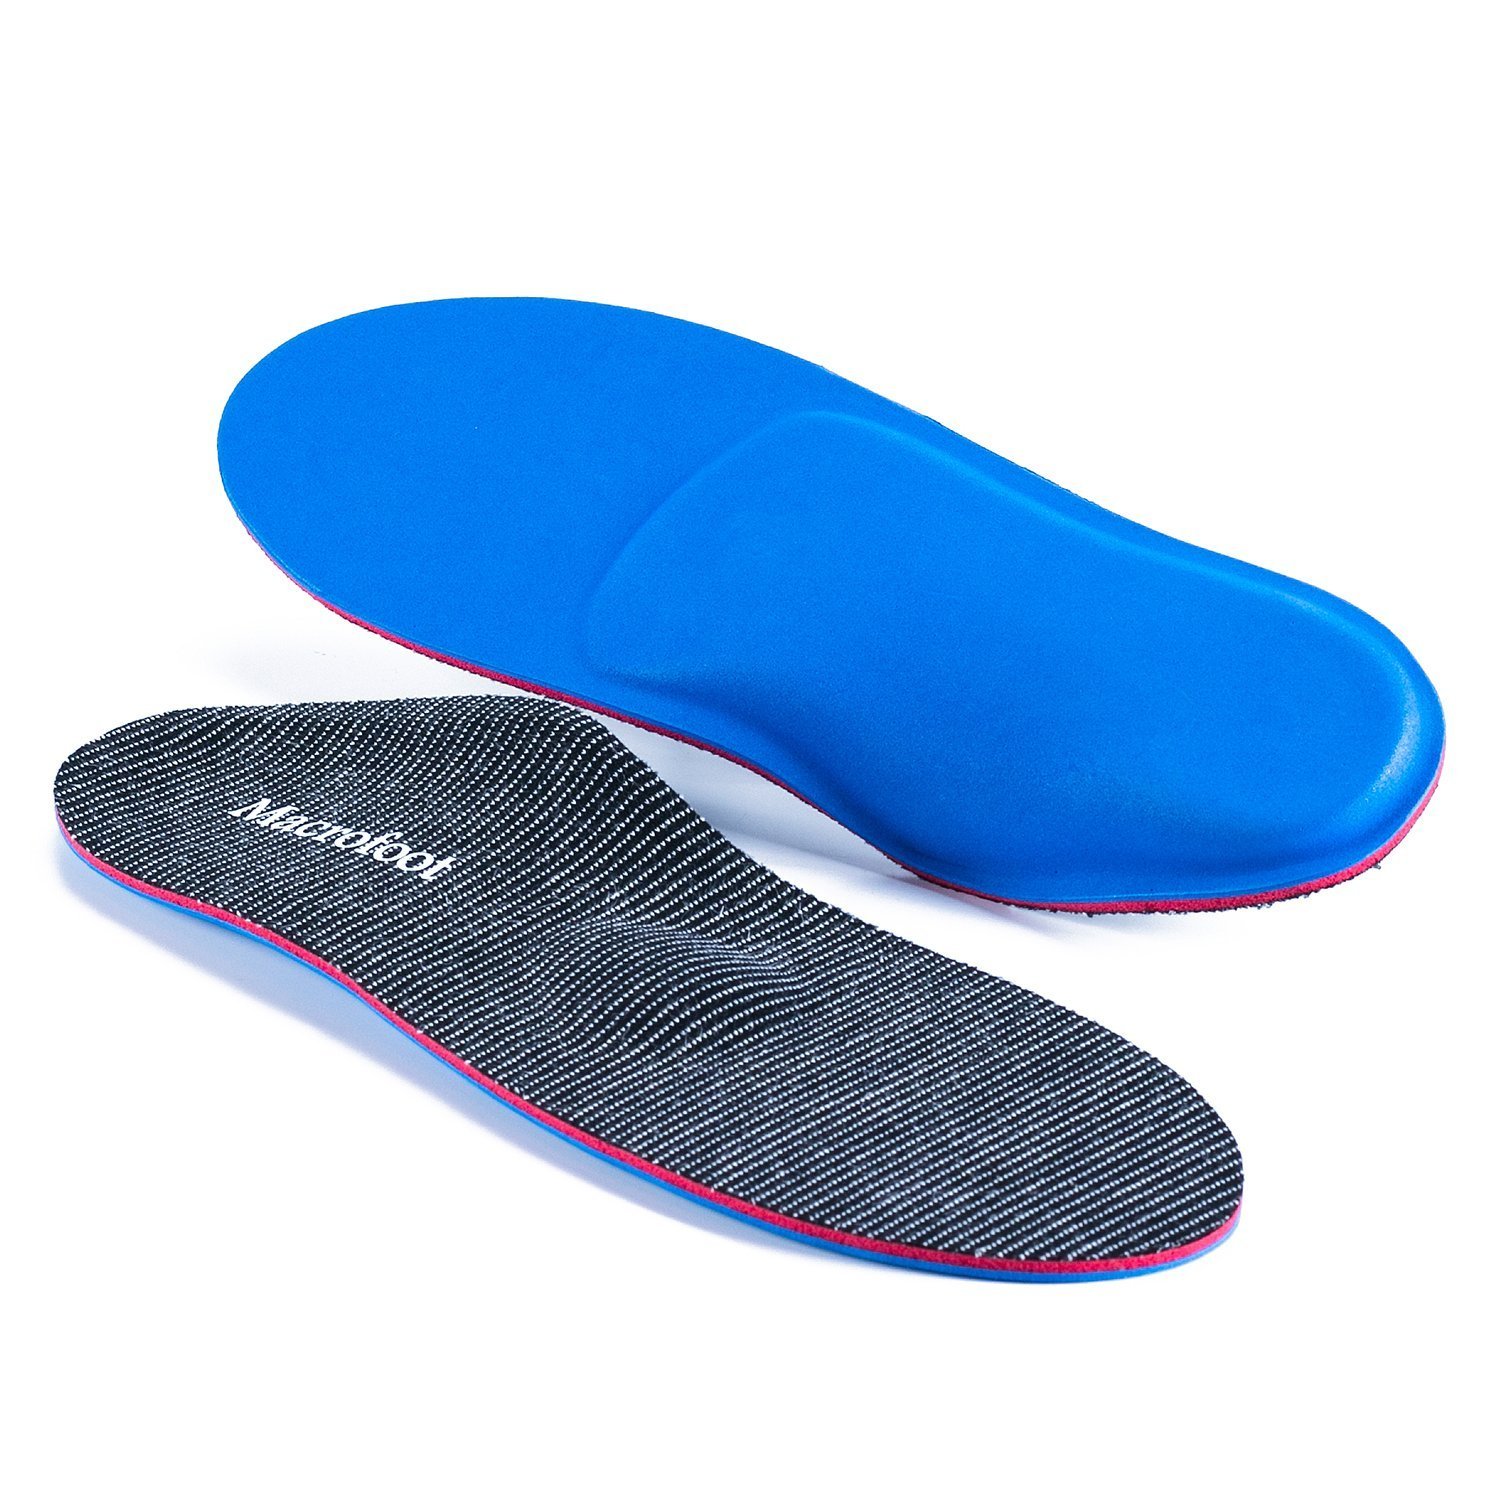 Orthotics Shoe Insoles/Inserts/Pads With High Arch Supports For Women ...